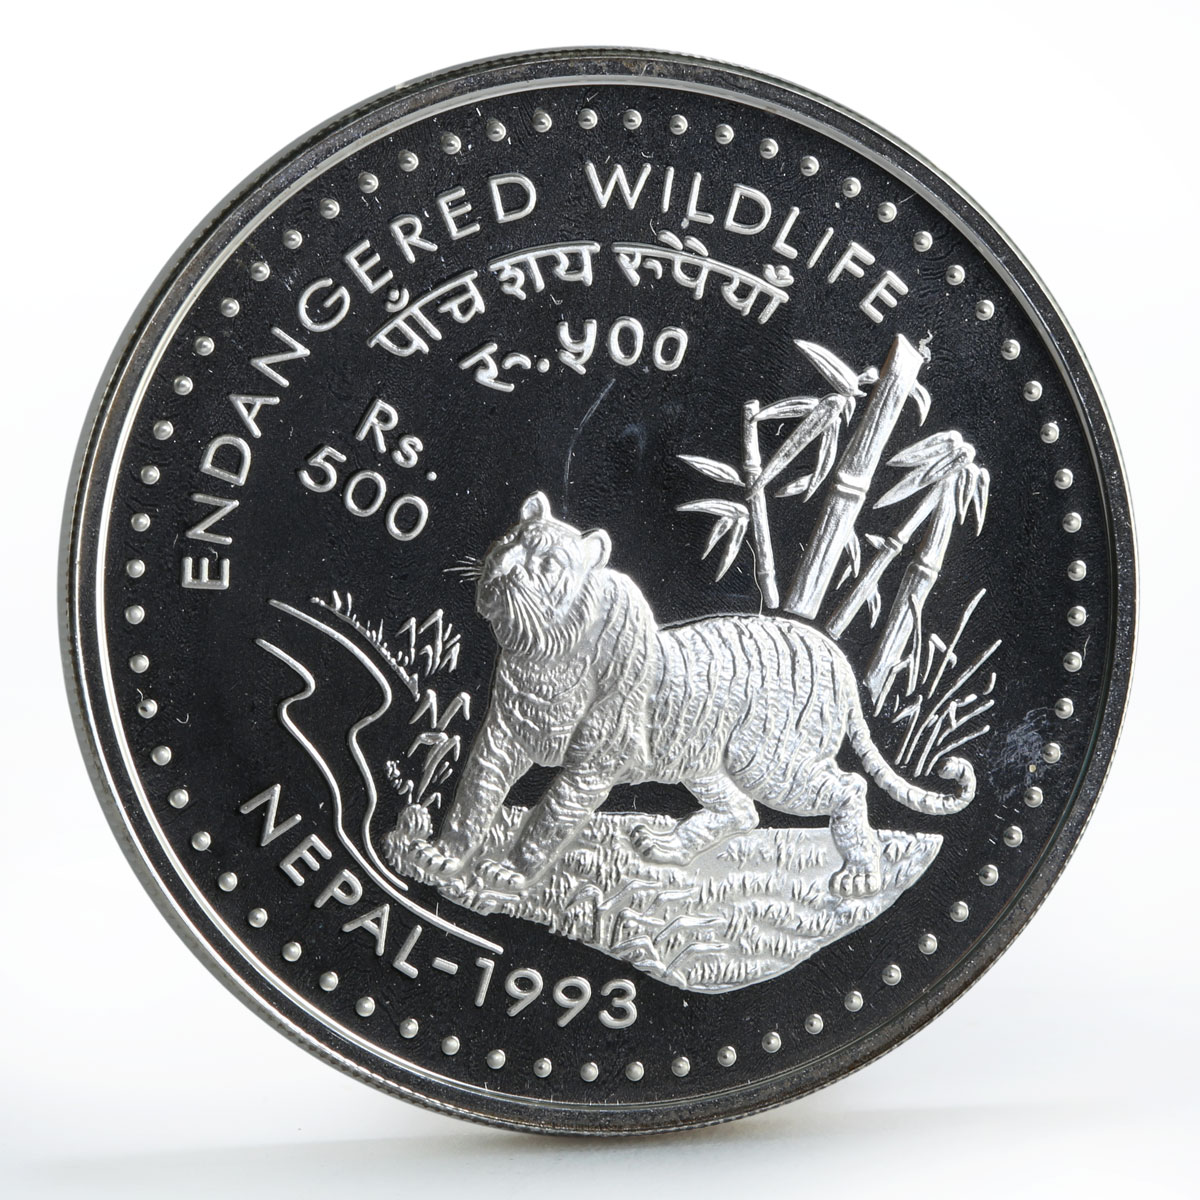 Nepal 500 rupees Endangered Wildlife Asian Tiger silver coin 1993